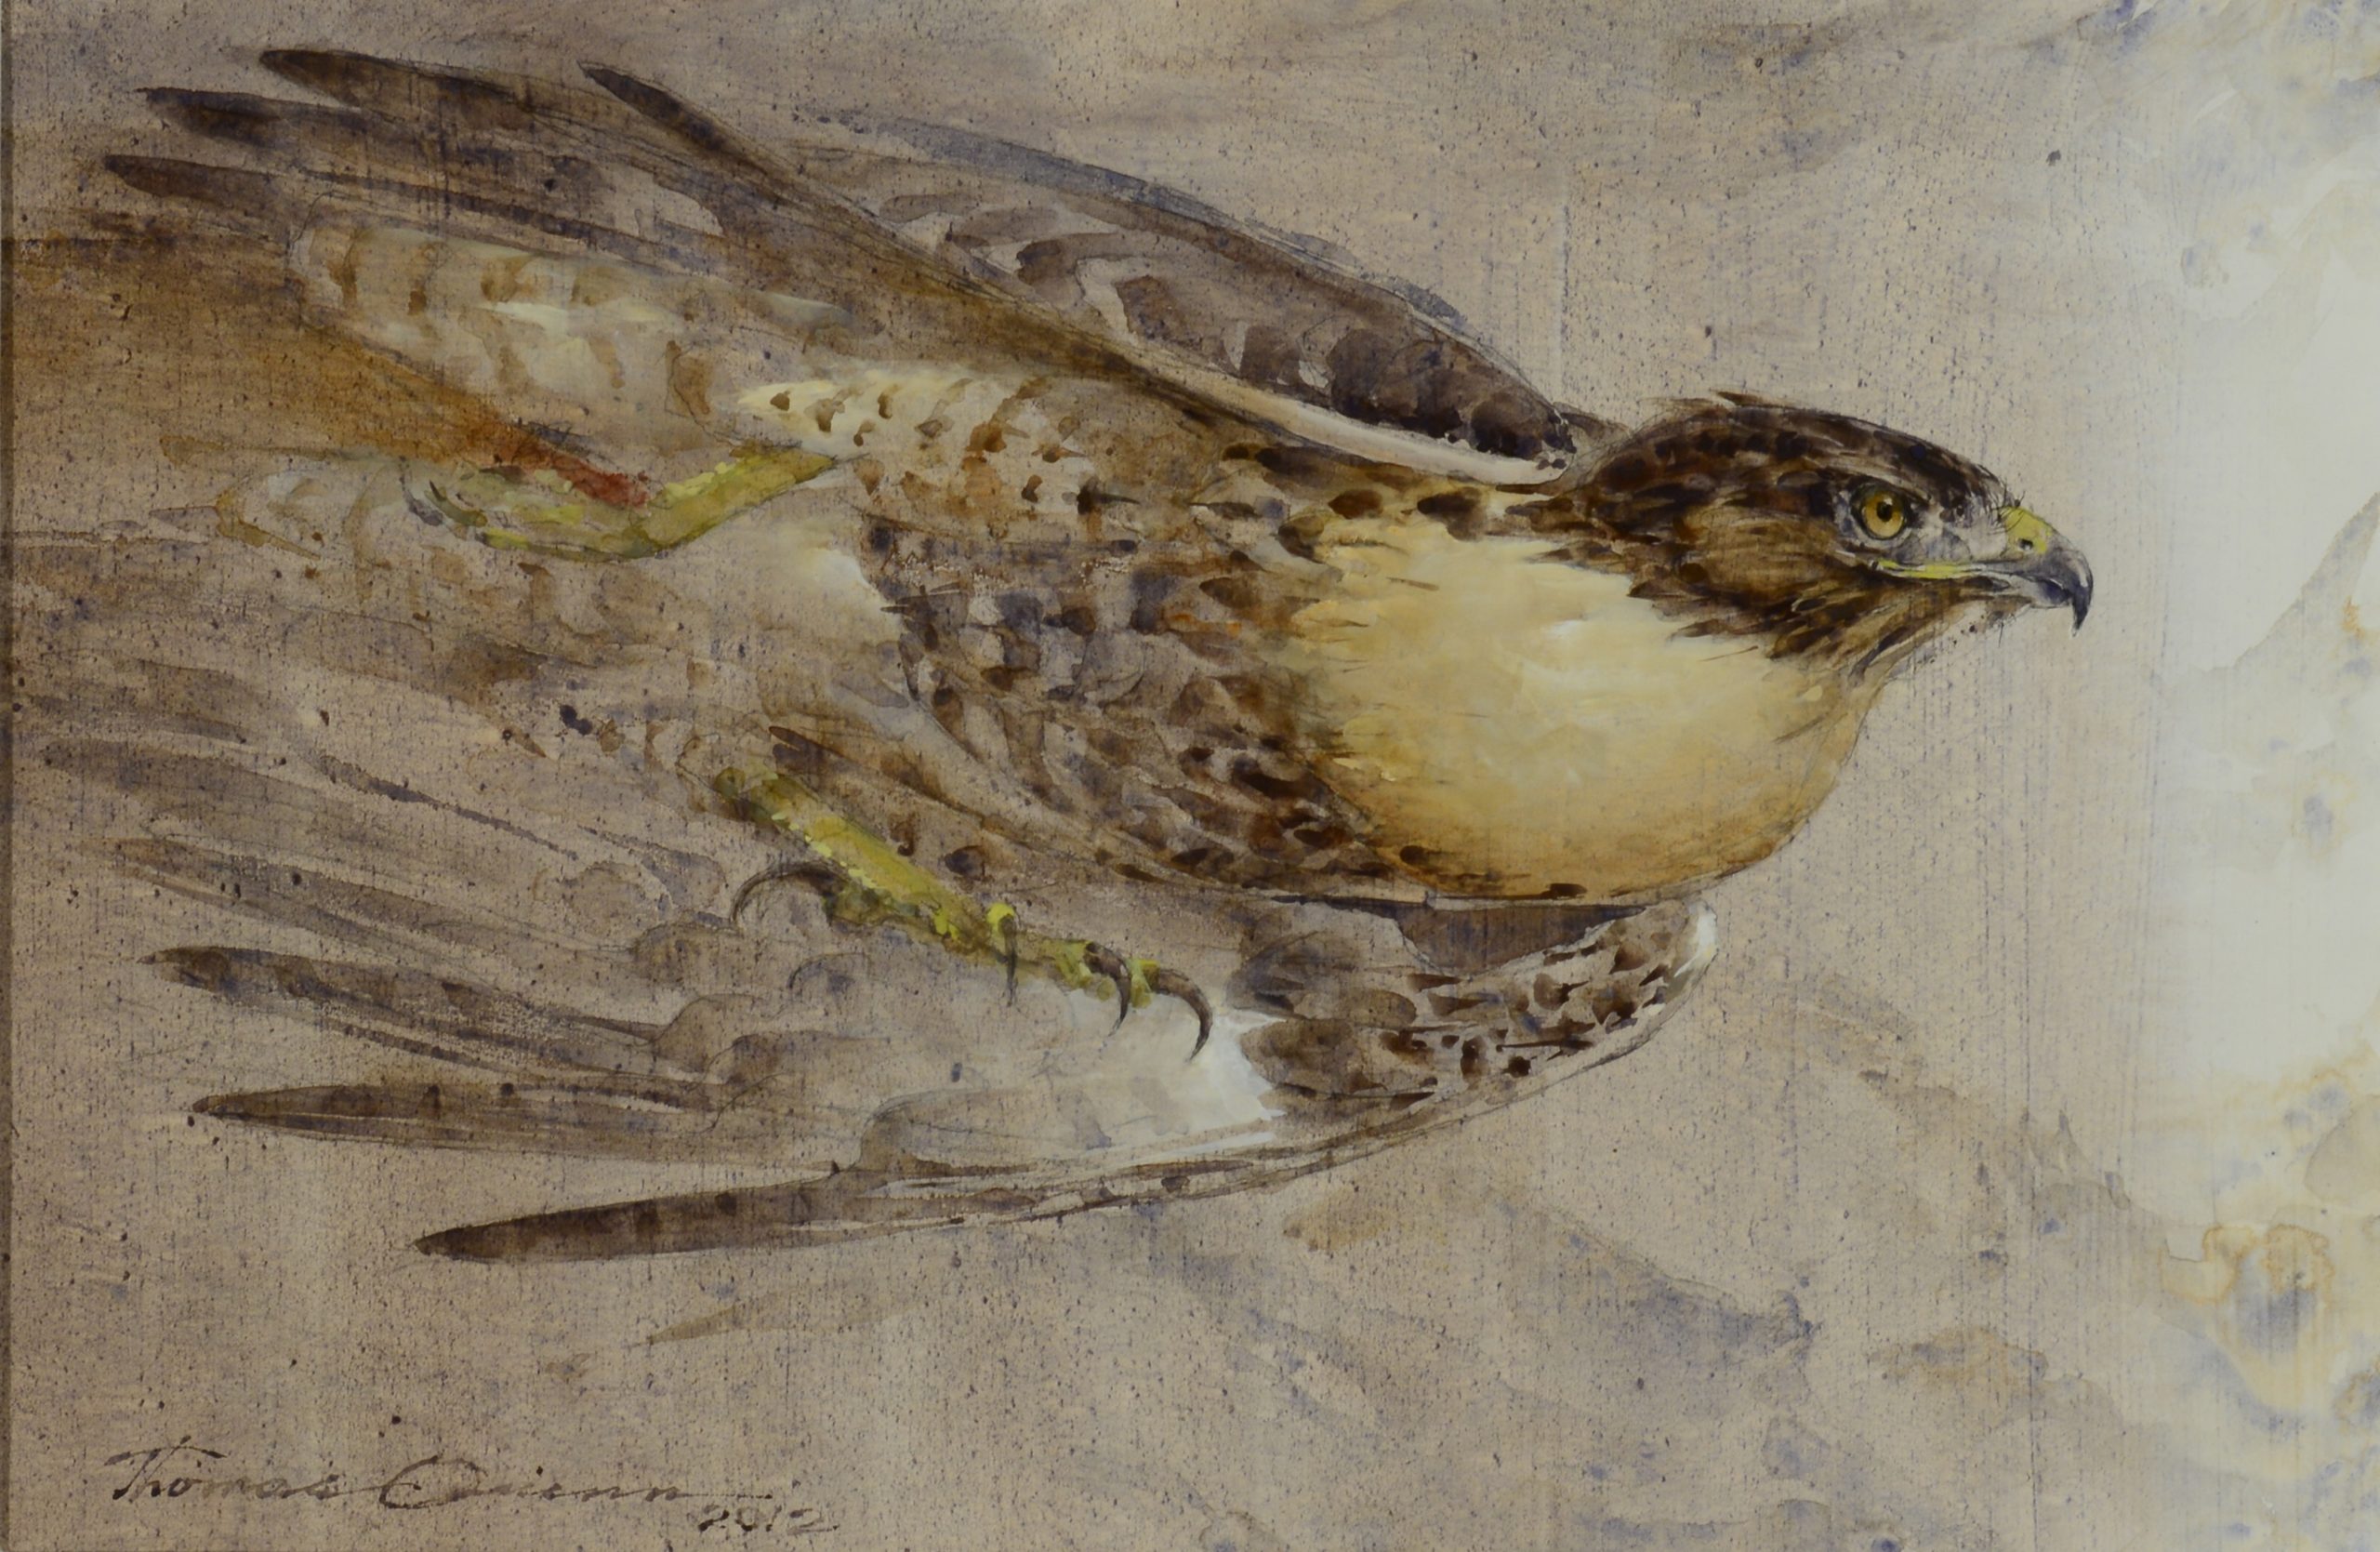 

											Tony Angell, Thomas Quinn</b>

											<em>
												Tony Angell and Thomas Quinn:  A Conversation with Nature</em> 

											<h4>
												September 25 - November 28, 2020											</h4>

		                																																<i>Red Tail Rush,</i>  
																																																					watercolor on paper, 
																																								 13 1/8 x 20 1/8 inches 
																								
		                				